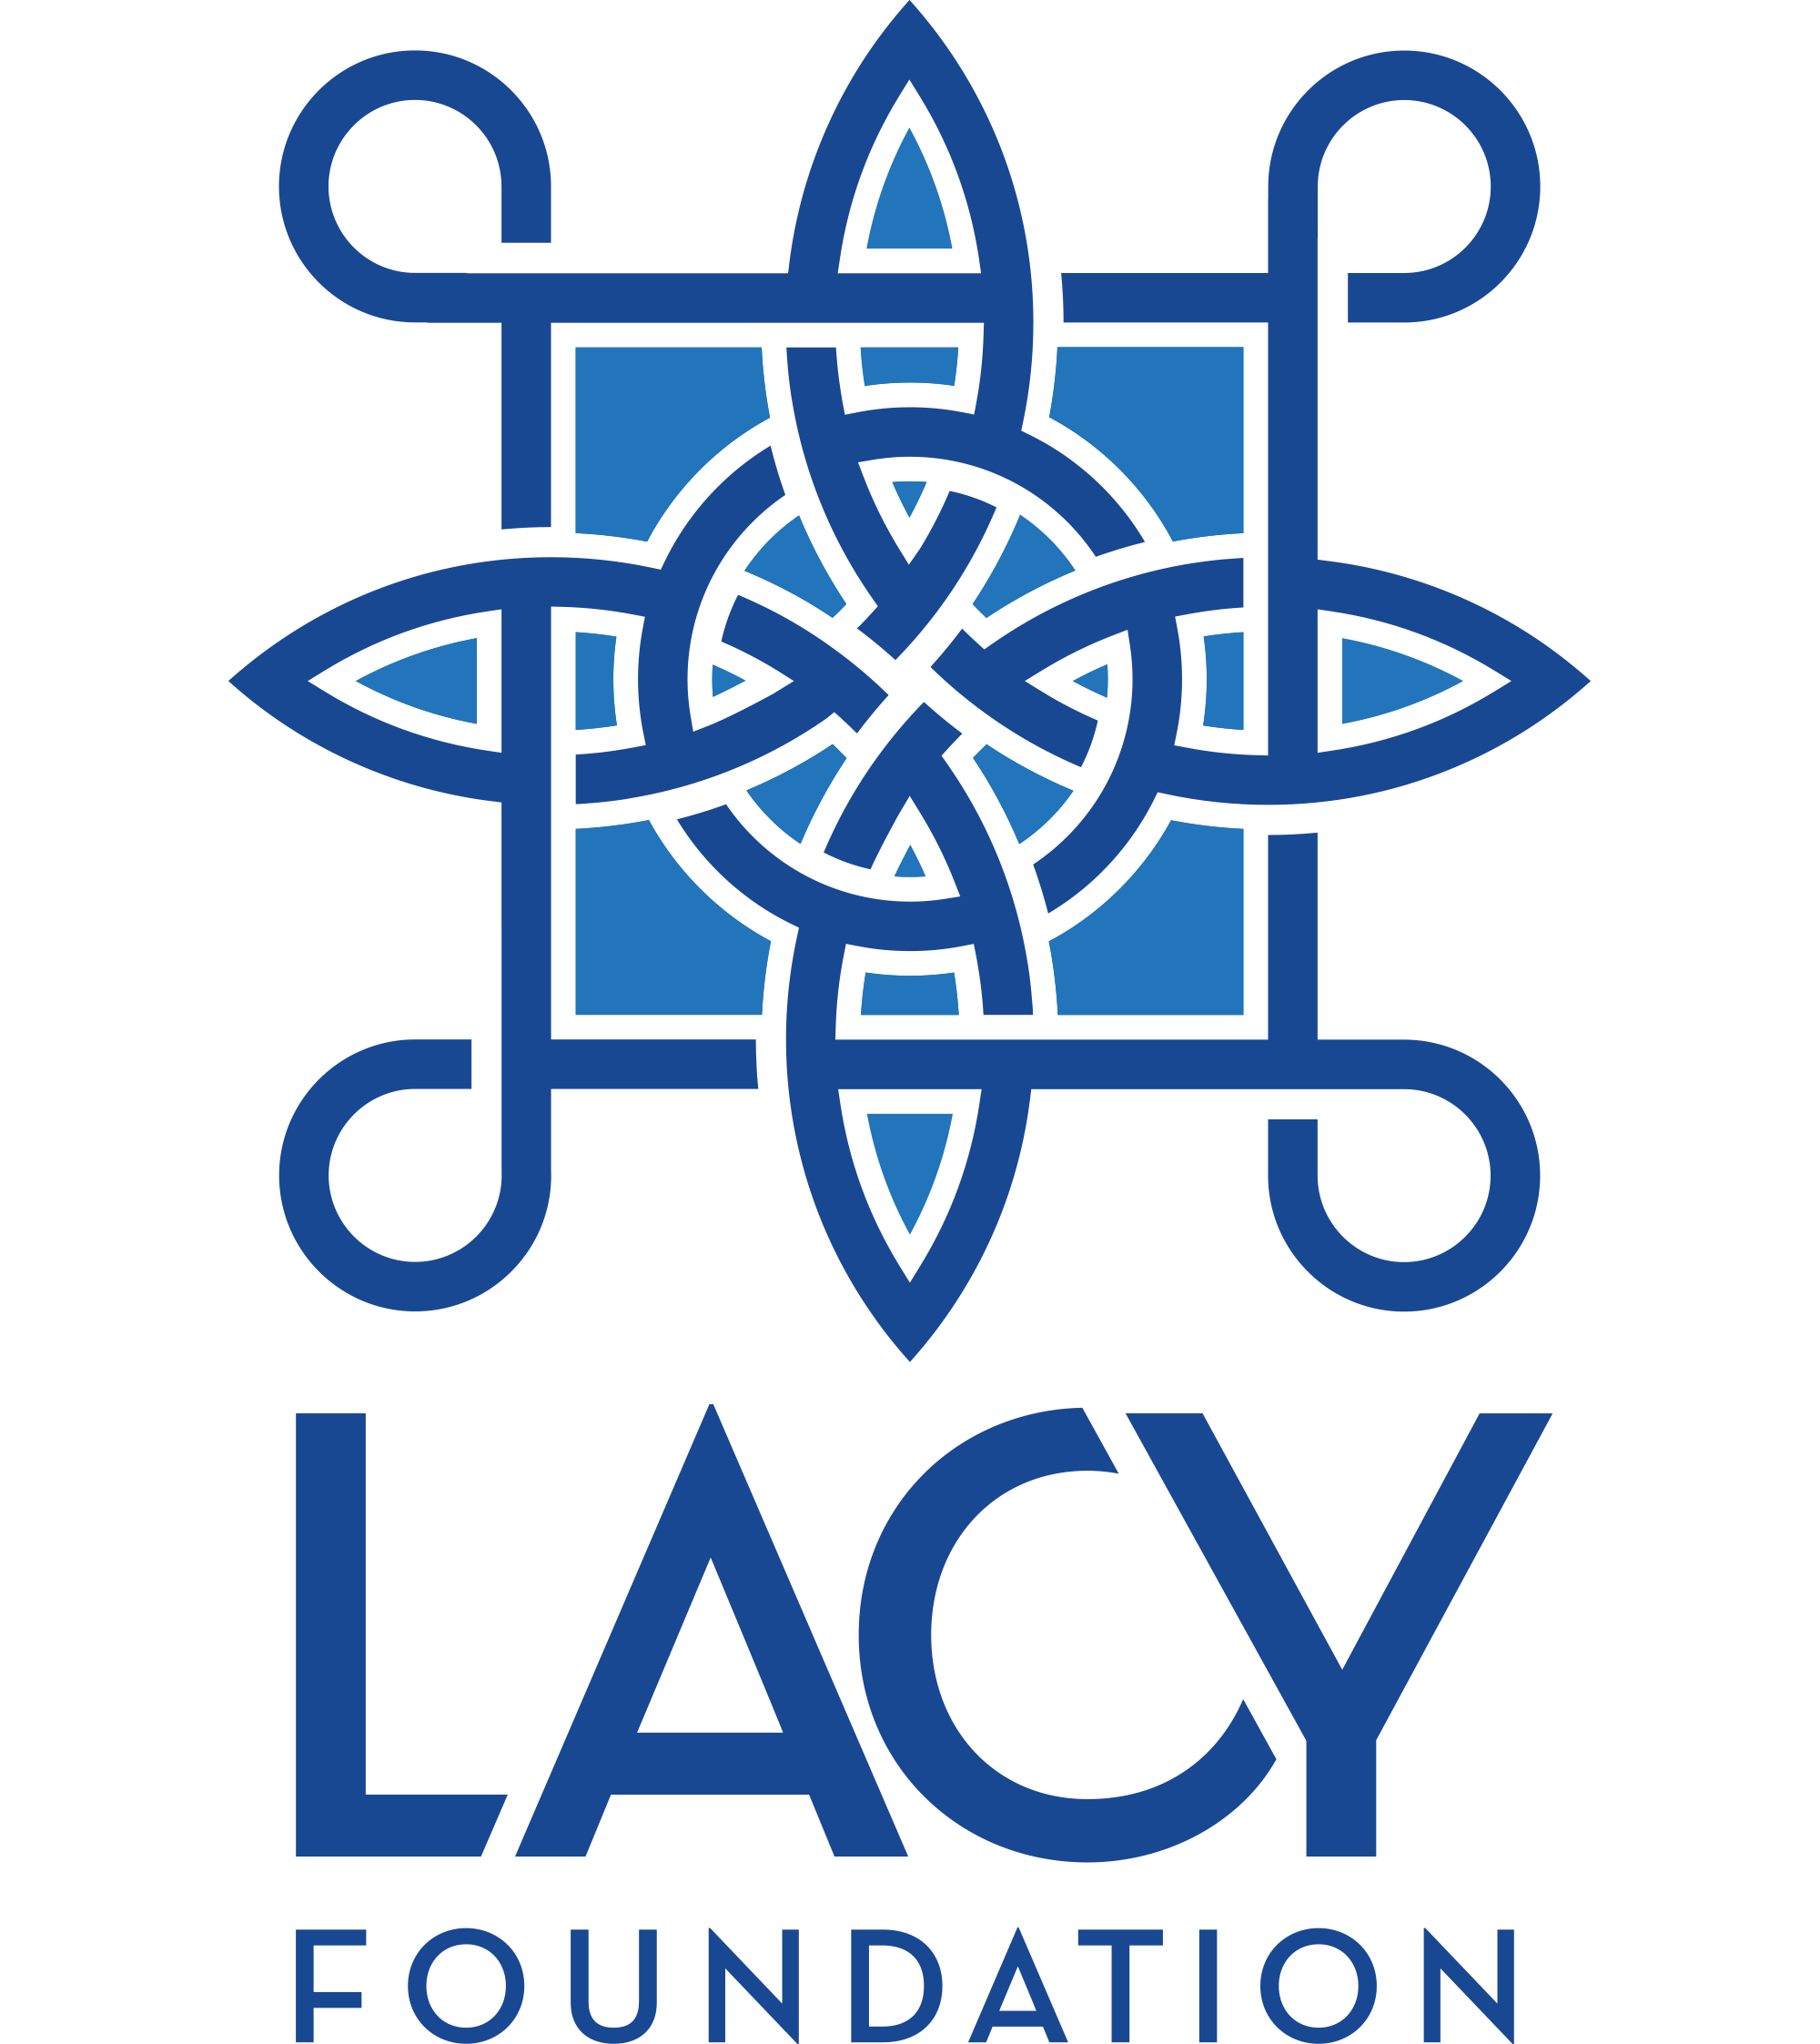 Lacy Foundation logo (opens in new window)